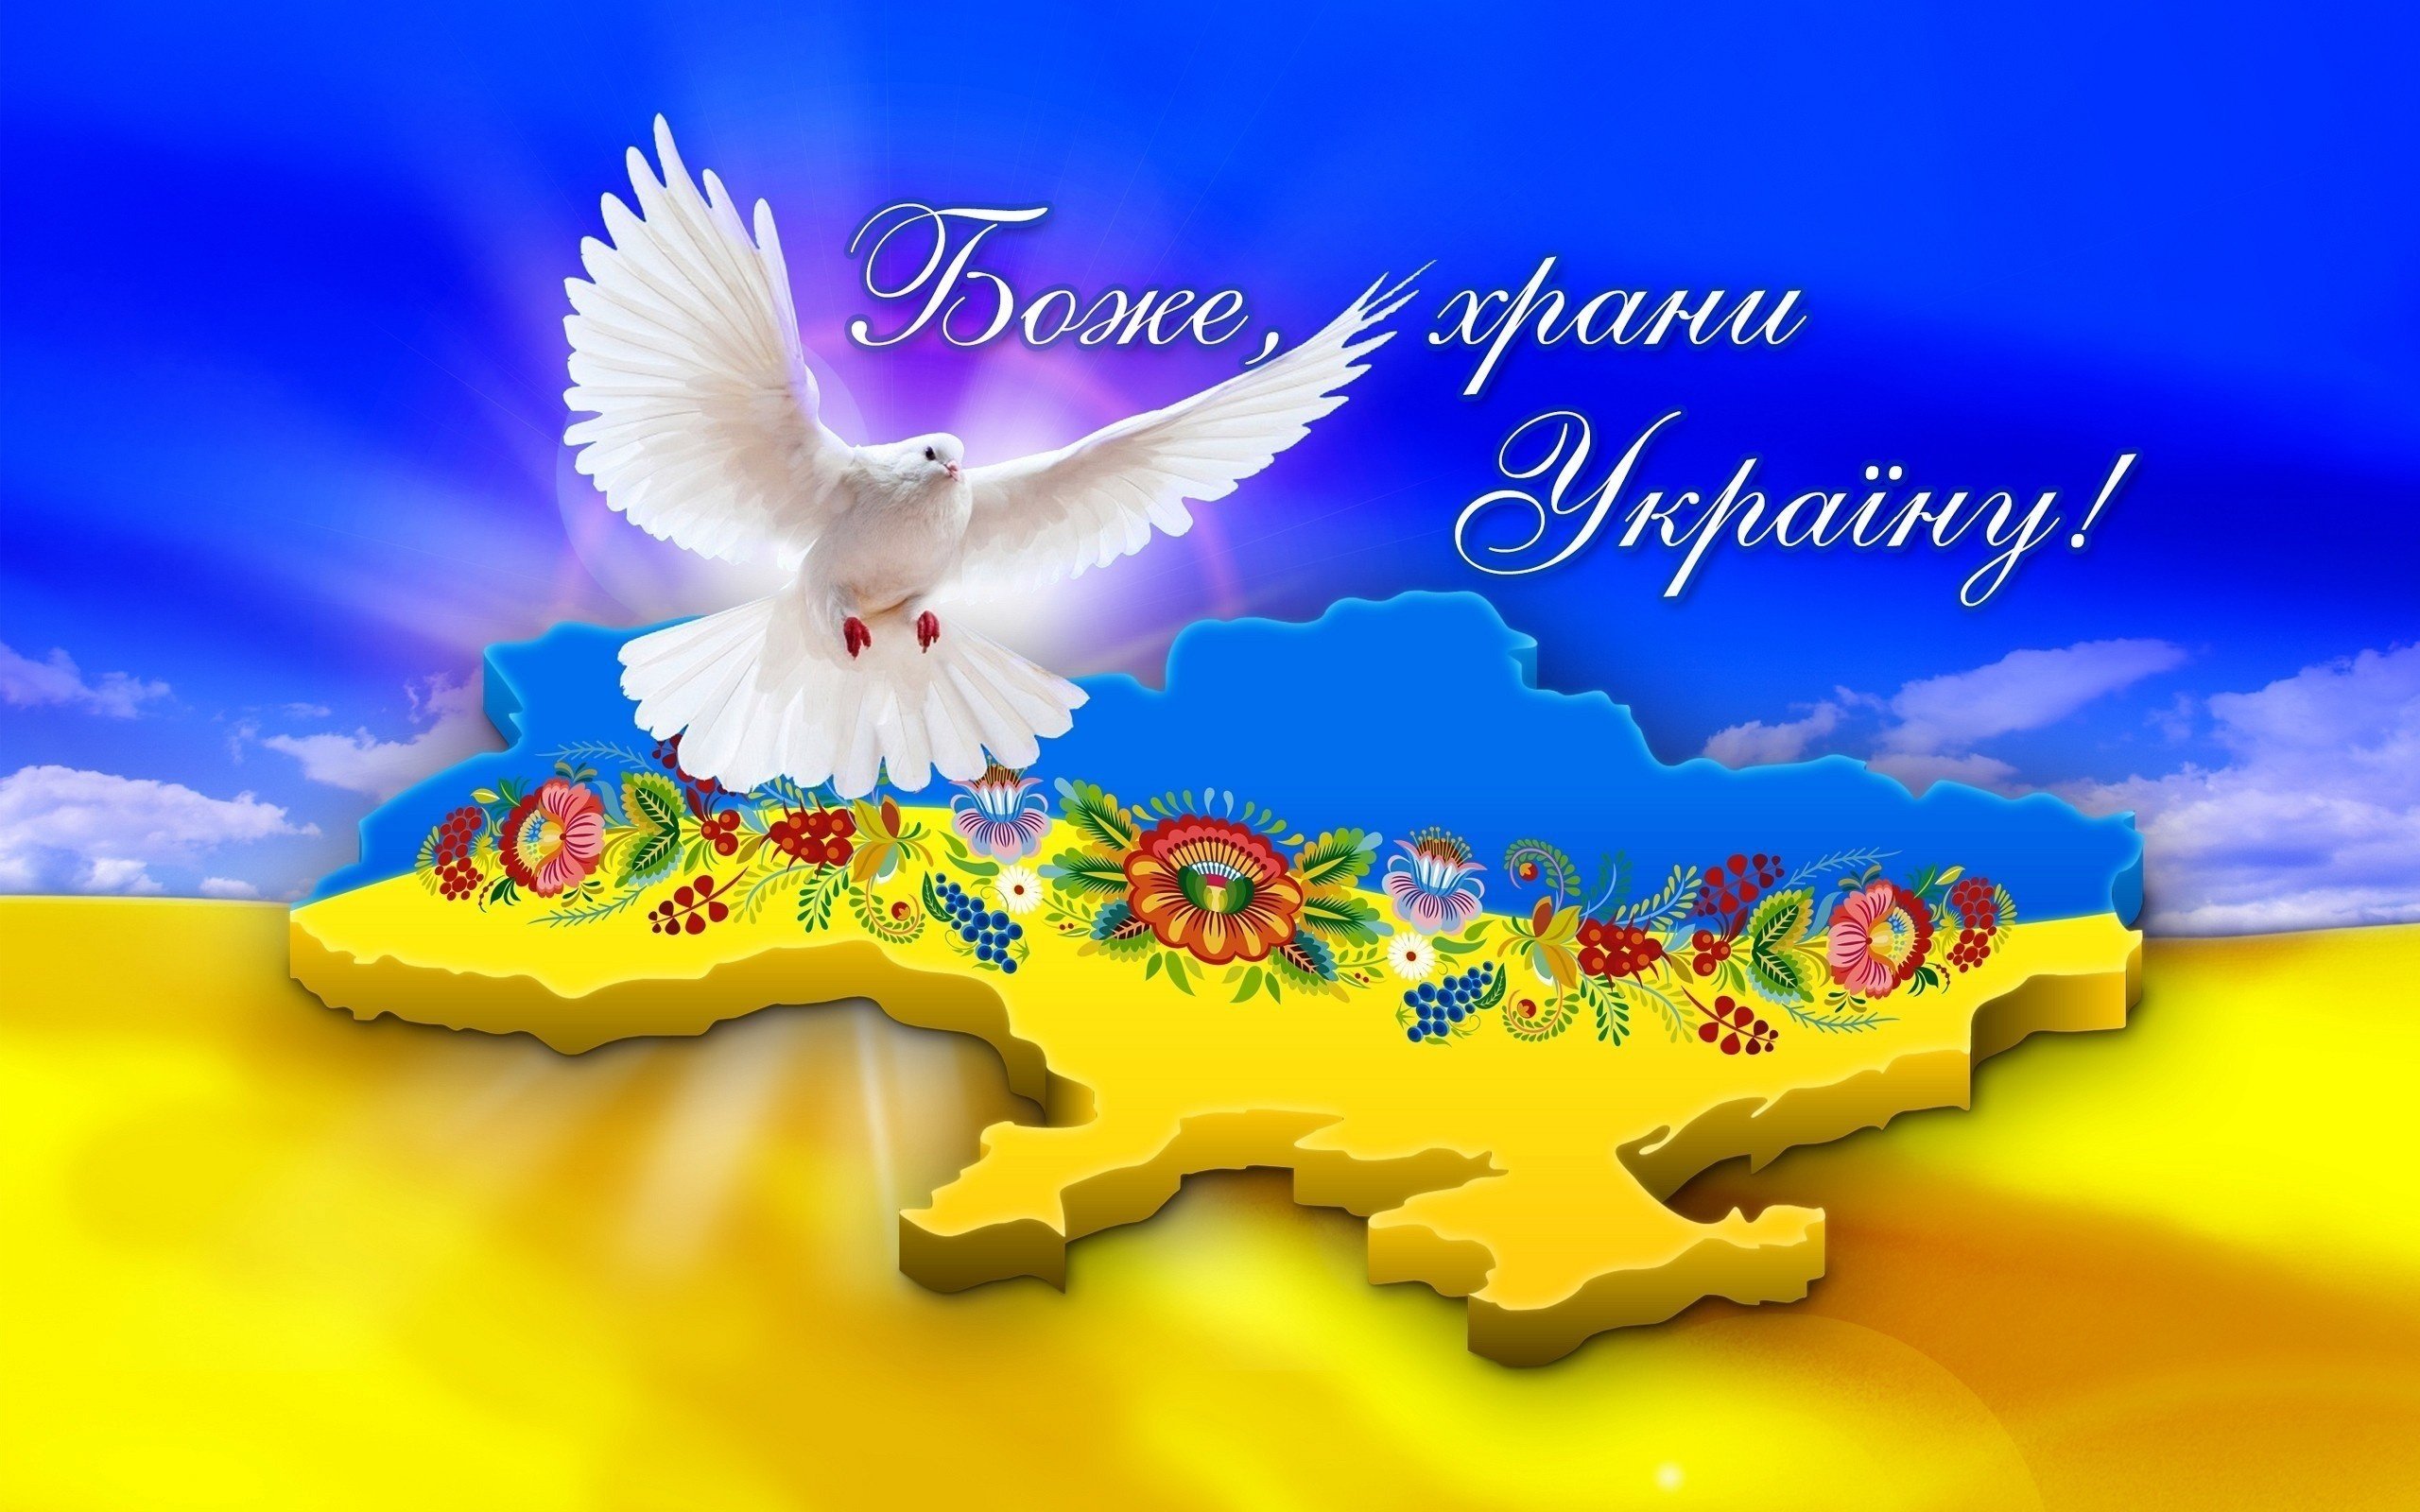 ukraine, A, Country, Patterns, Lettering, Words, Dove, Blue, Yellow Wallpaper